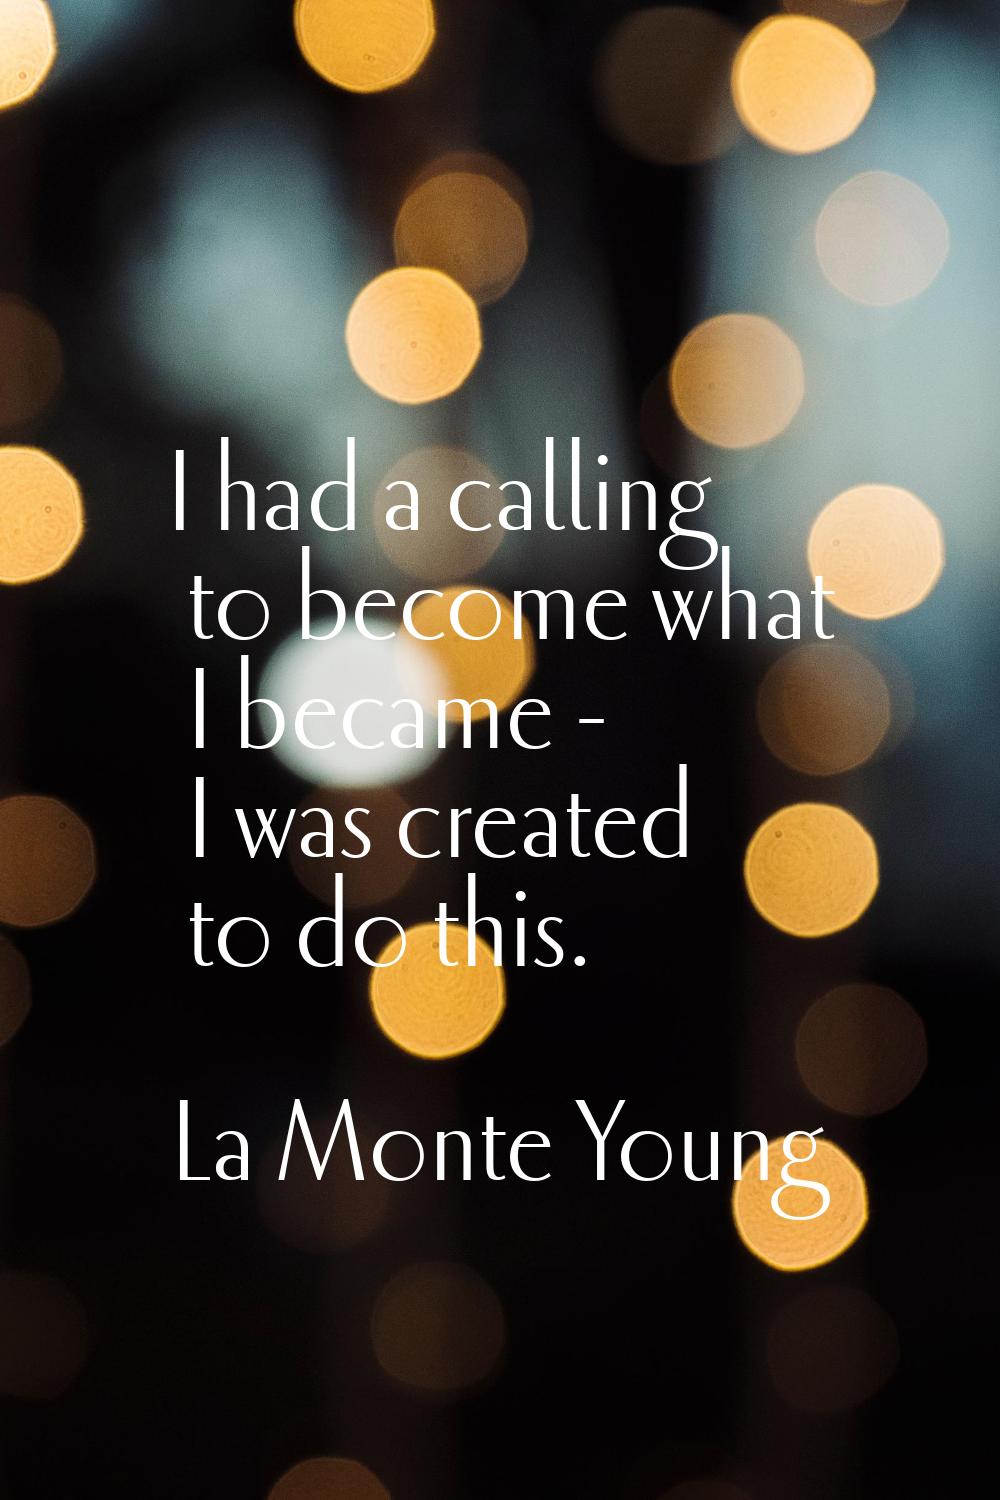 I had a calling to become what I became - I was created to do this.